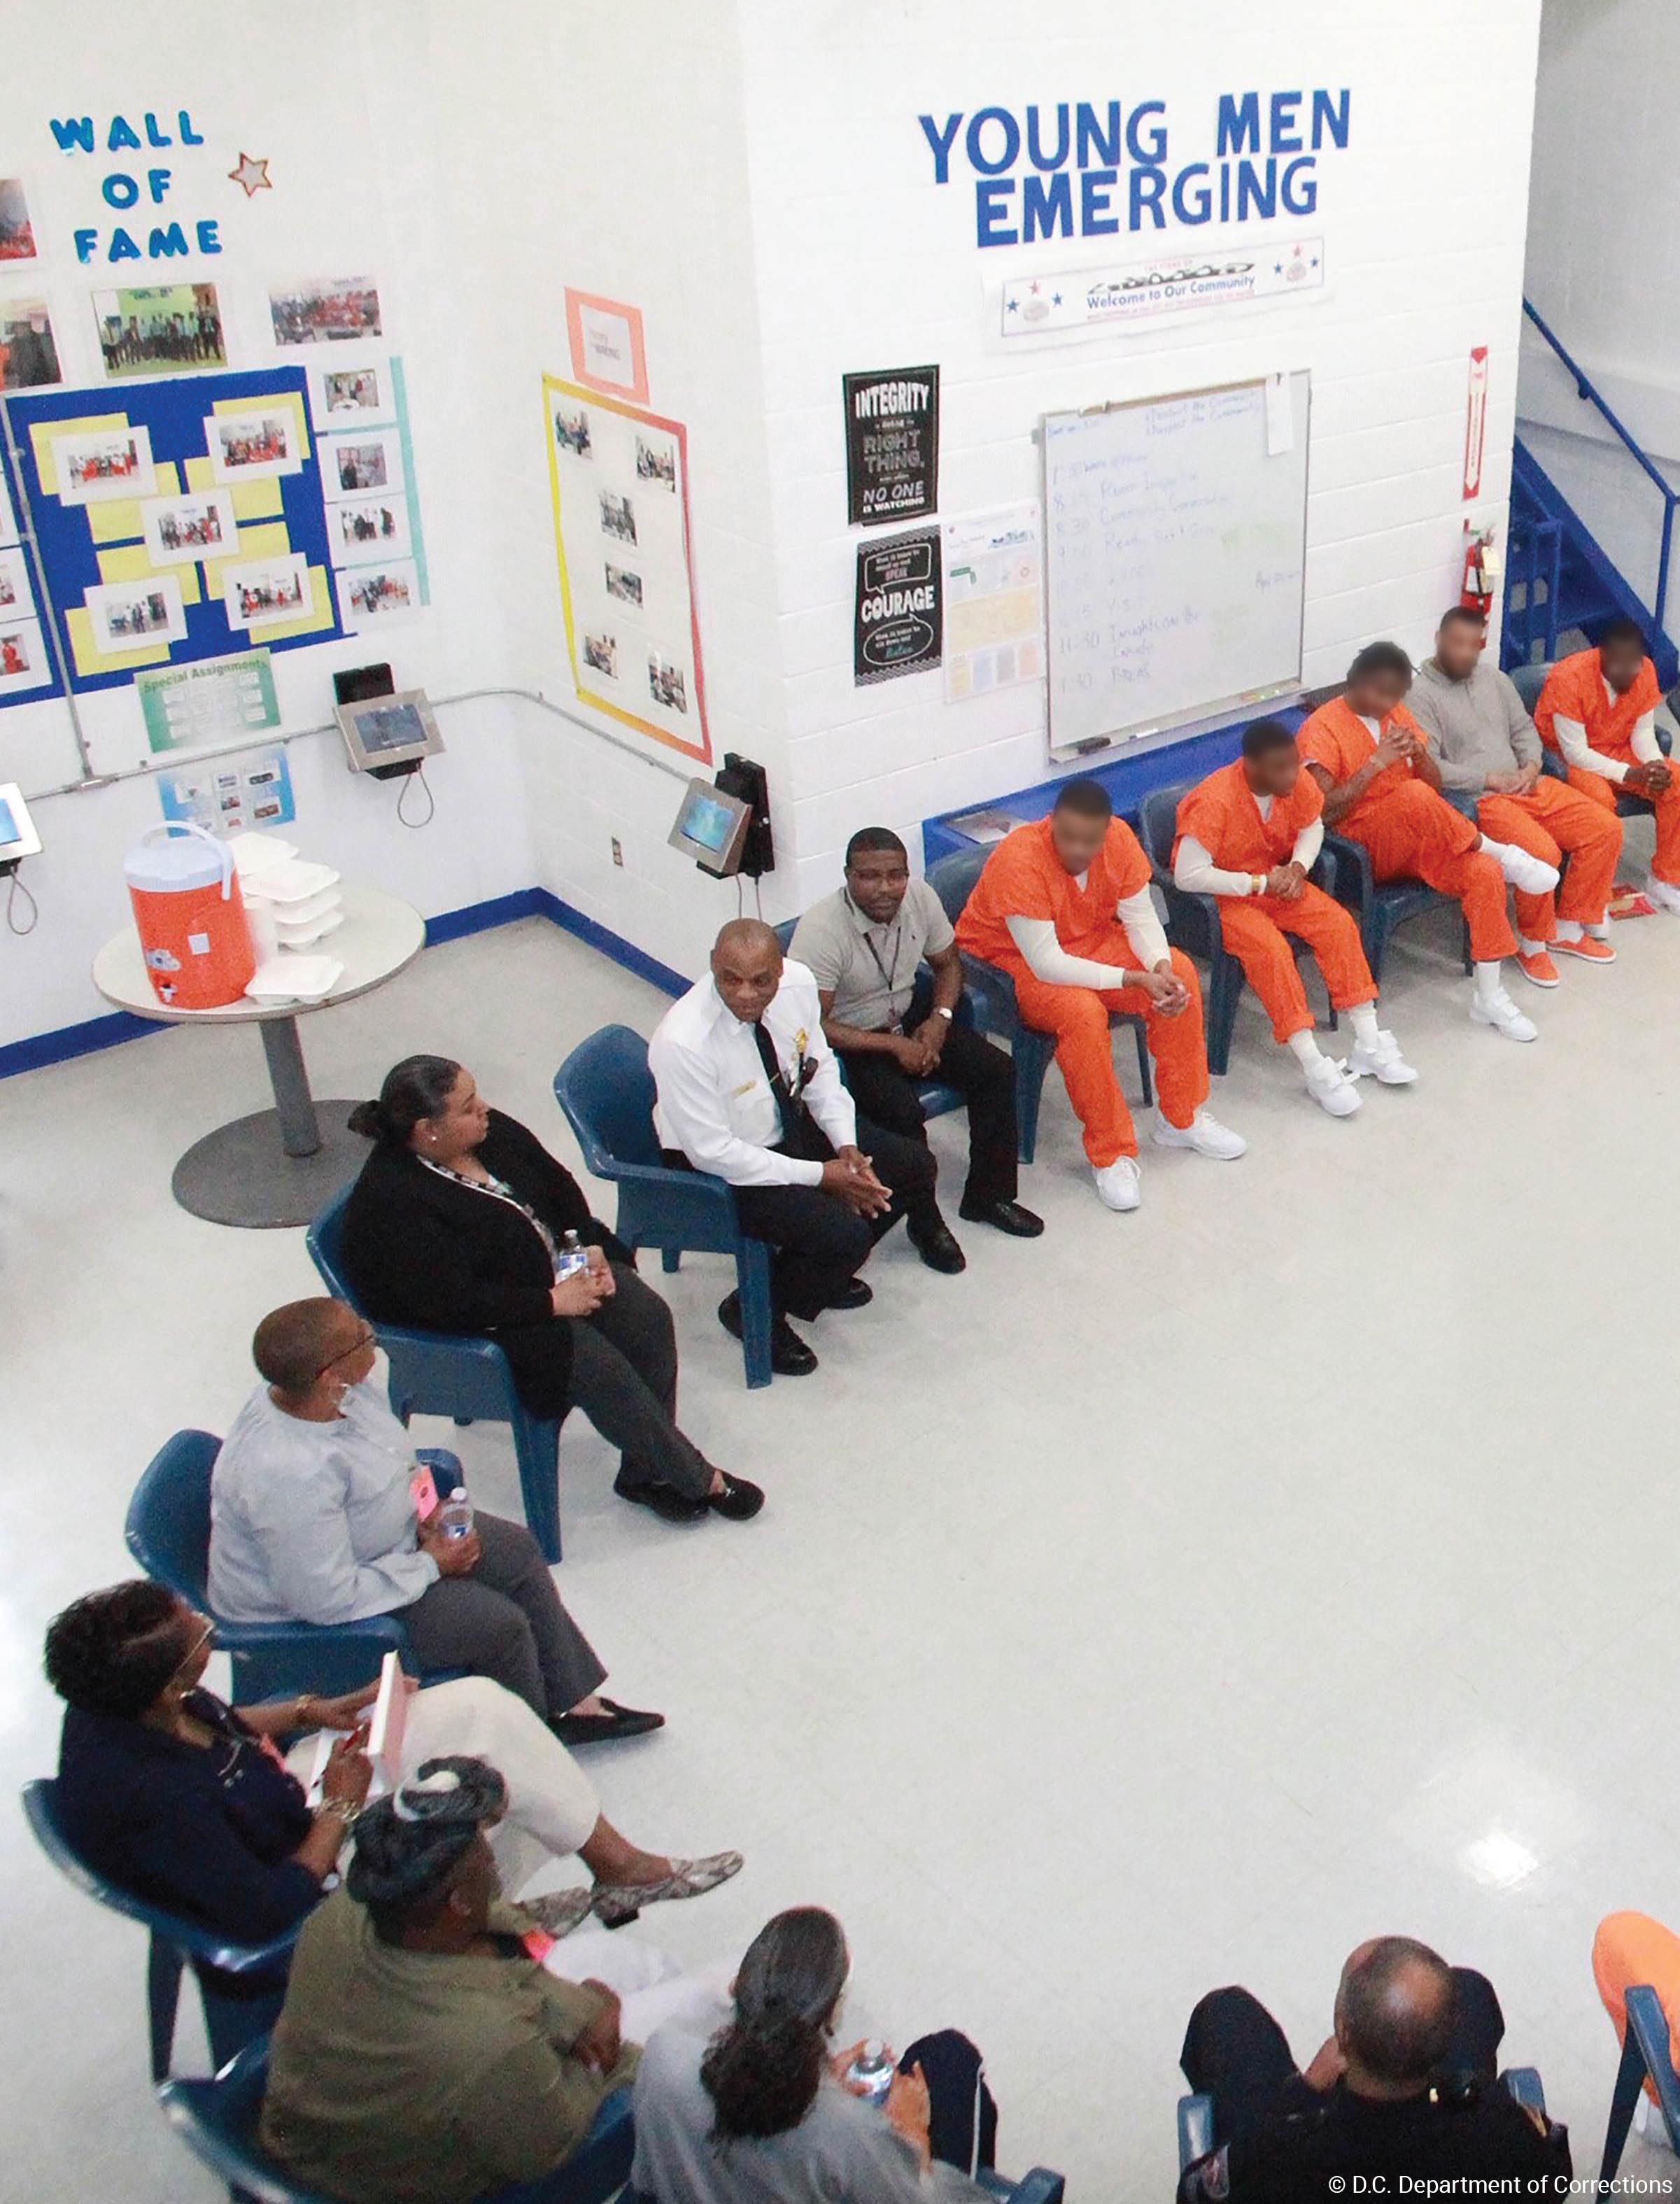 Inmates and program staff seated in a semi-circle